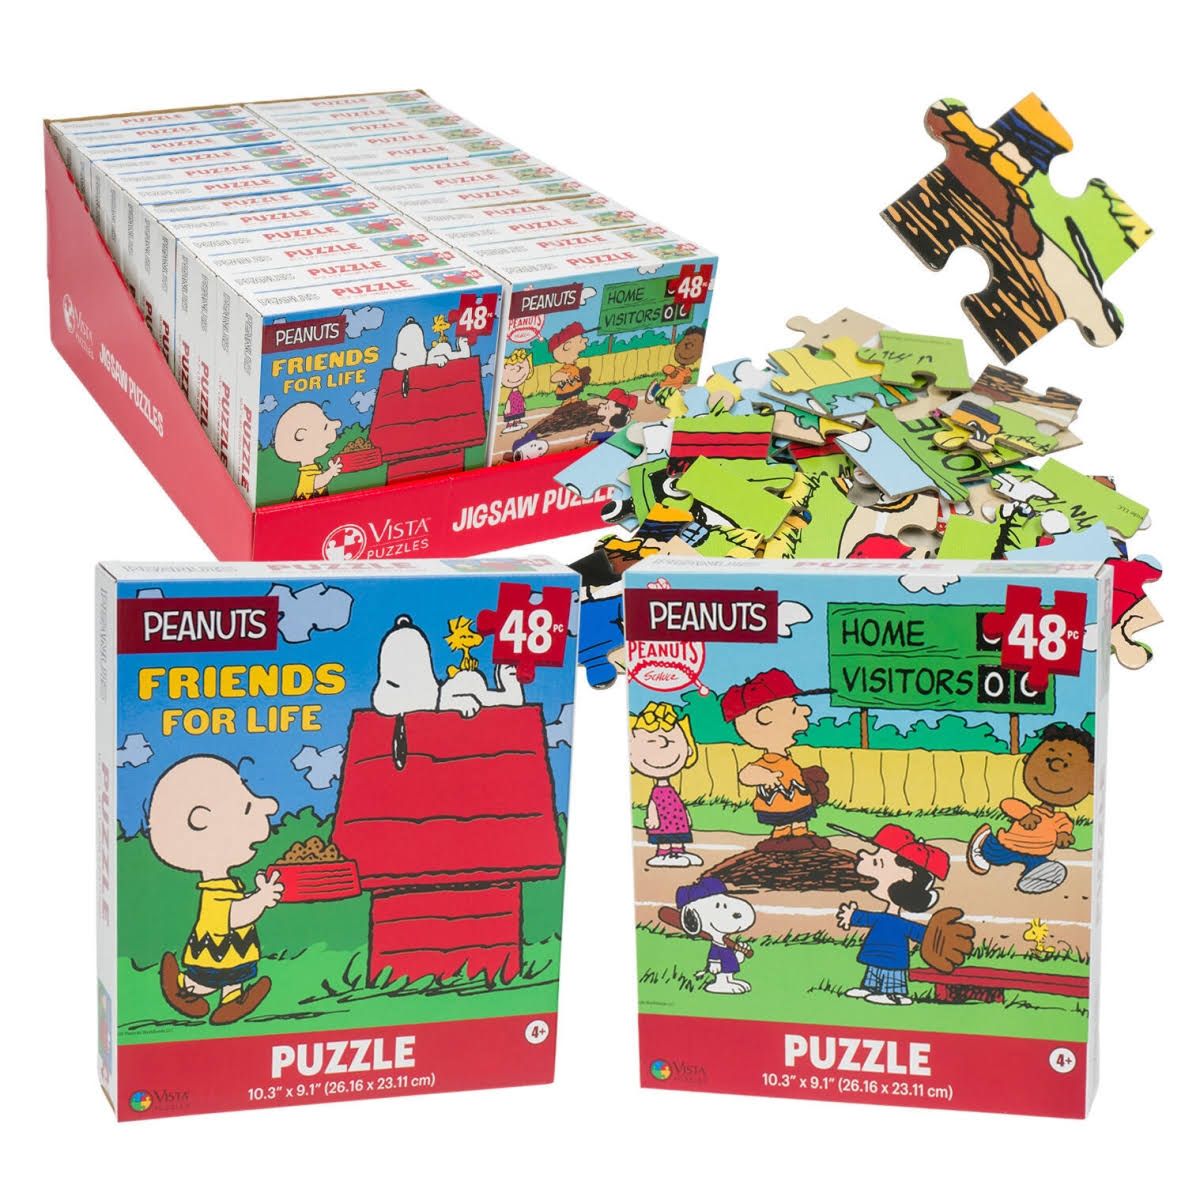 Ddi 2356788 Peanuts Puzzle Assorted Style - 48 Piece - Case of 24